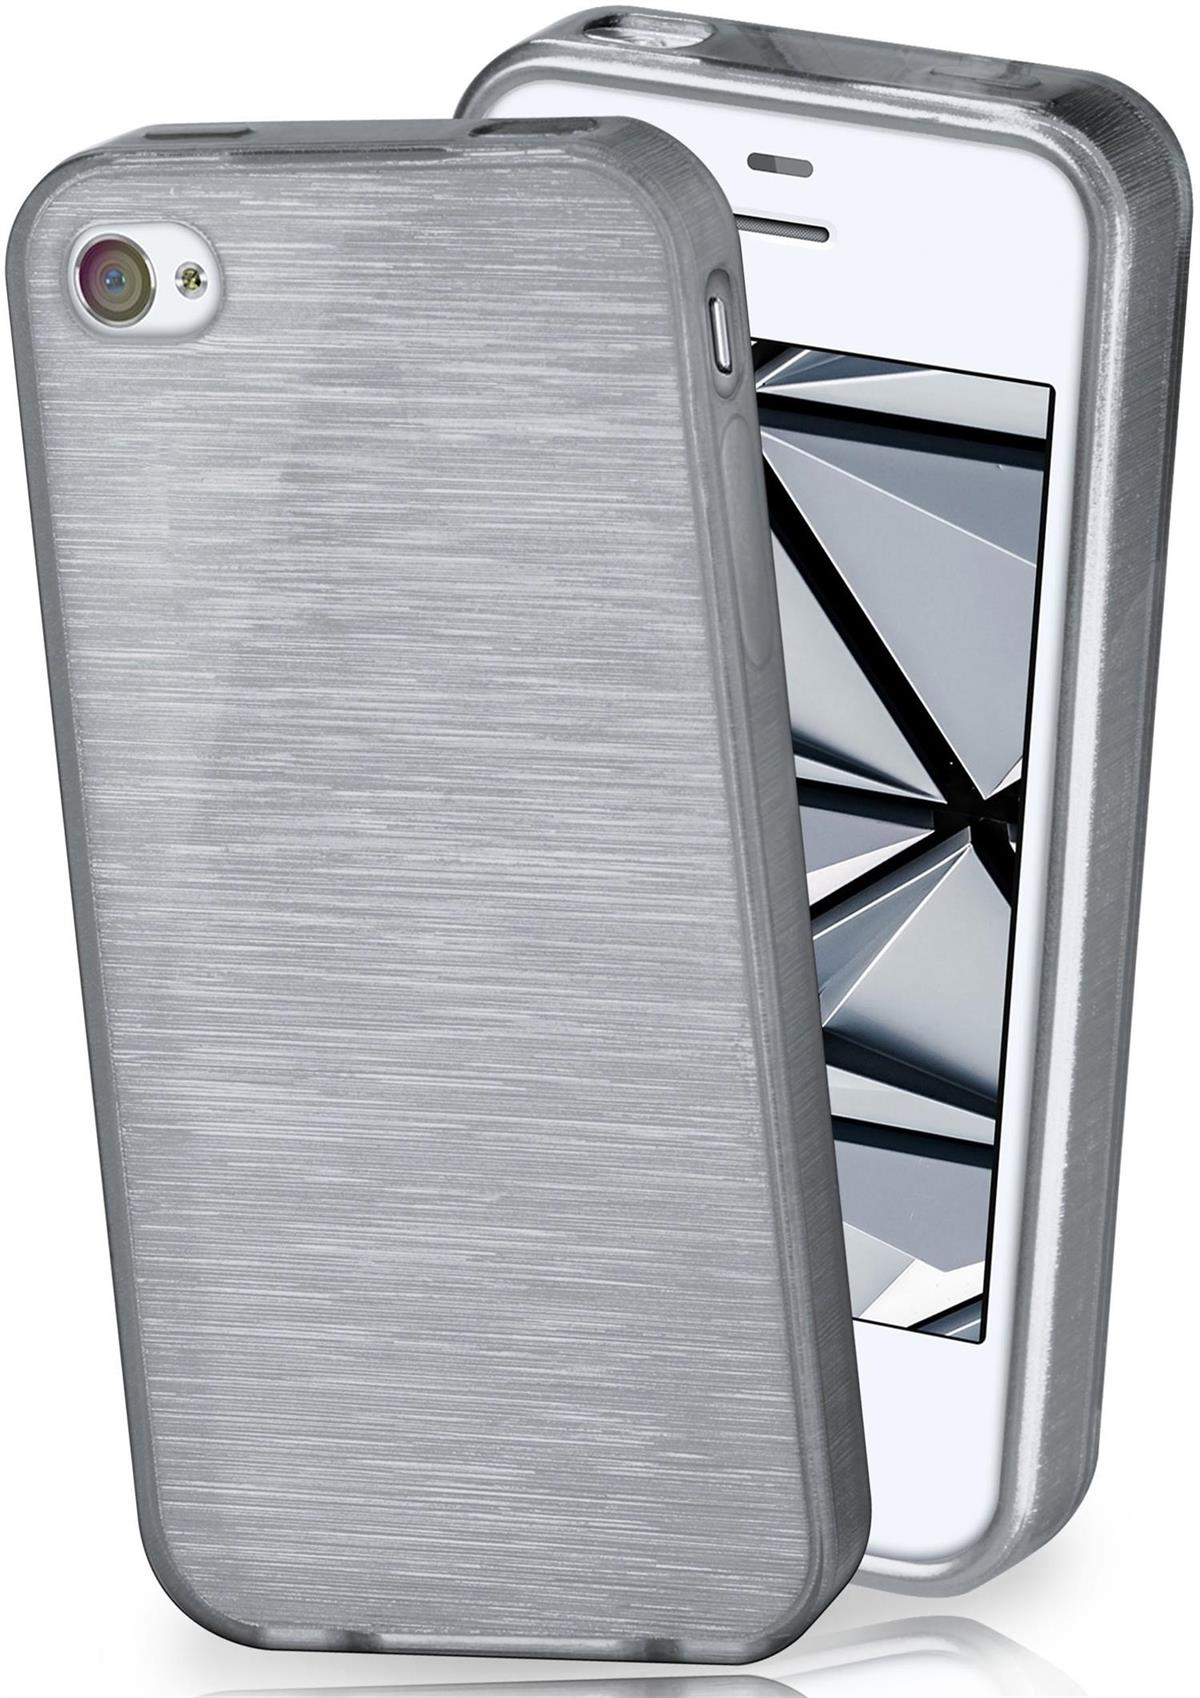 Platin-Silver MOEX Case, Backcover, Brushed iPhone Apple, 4S,